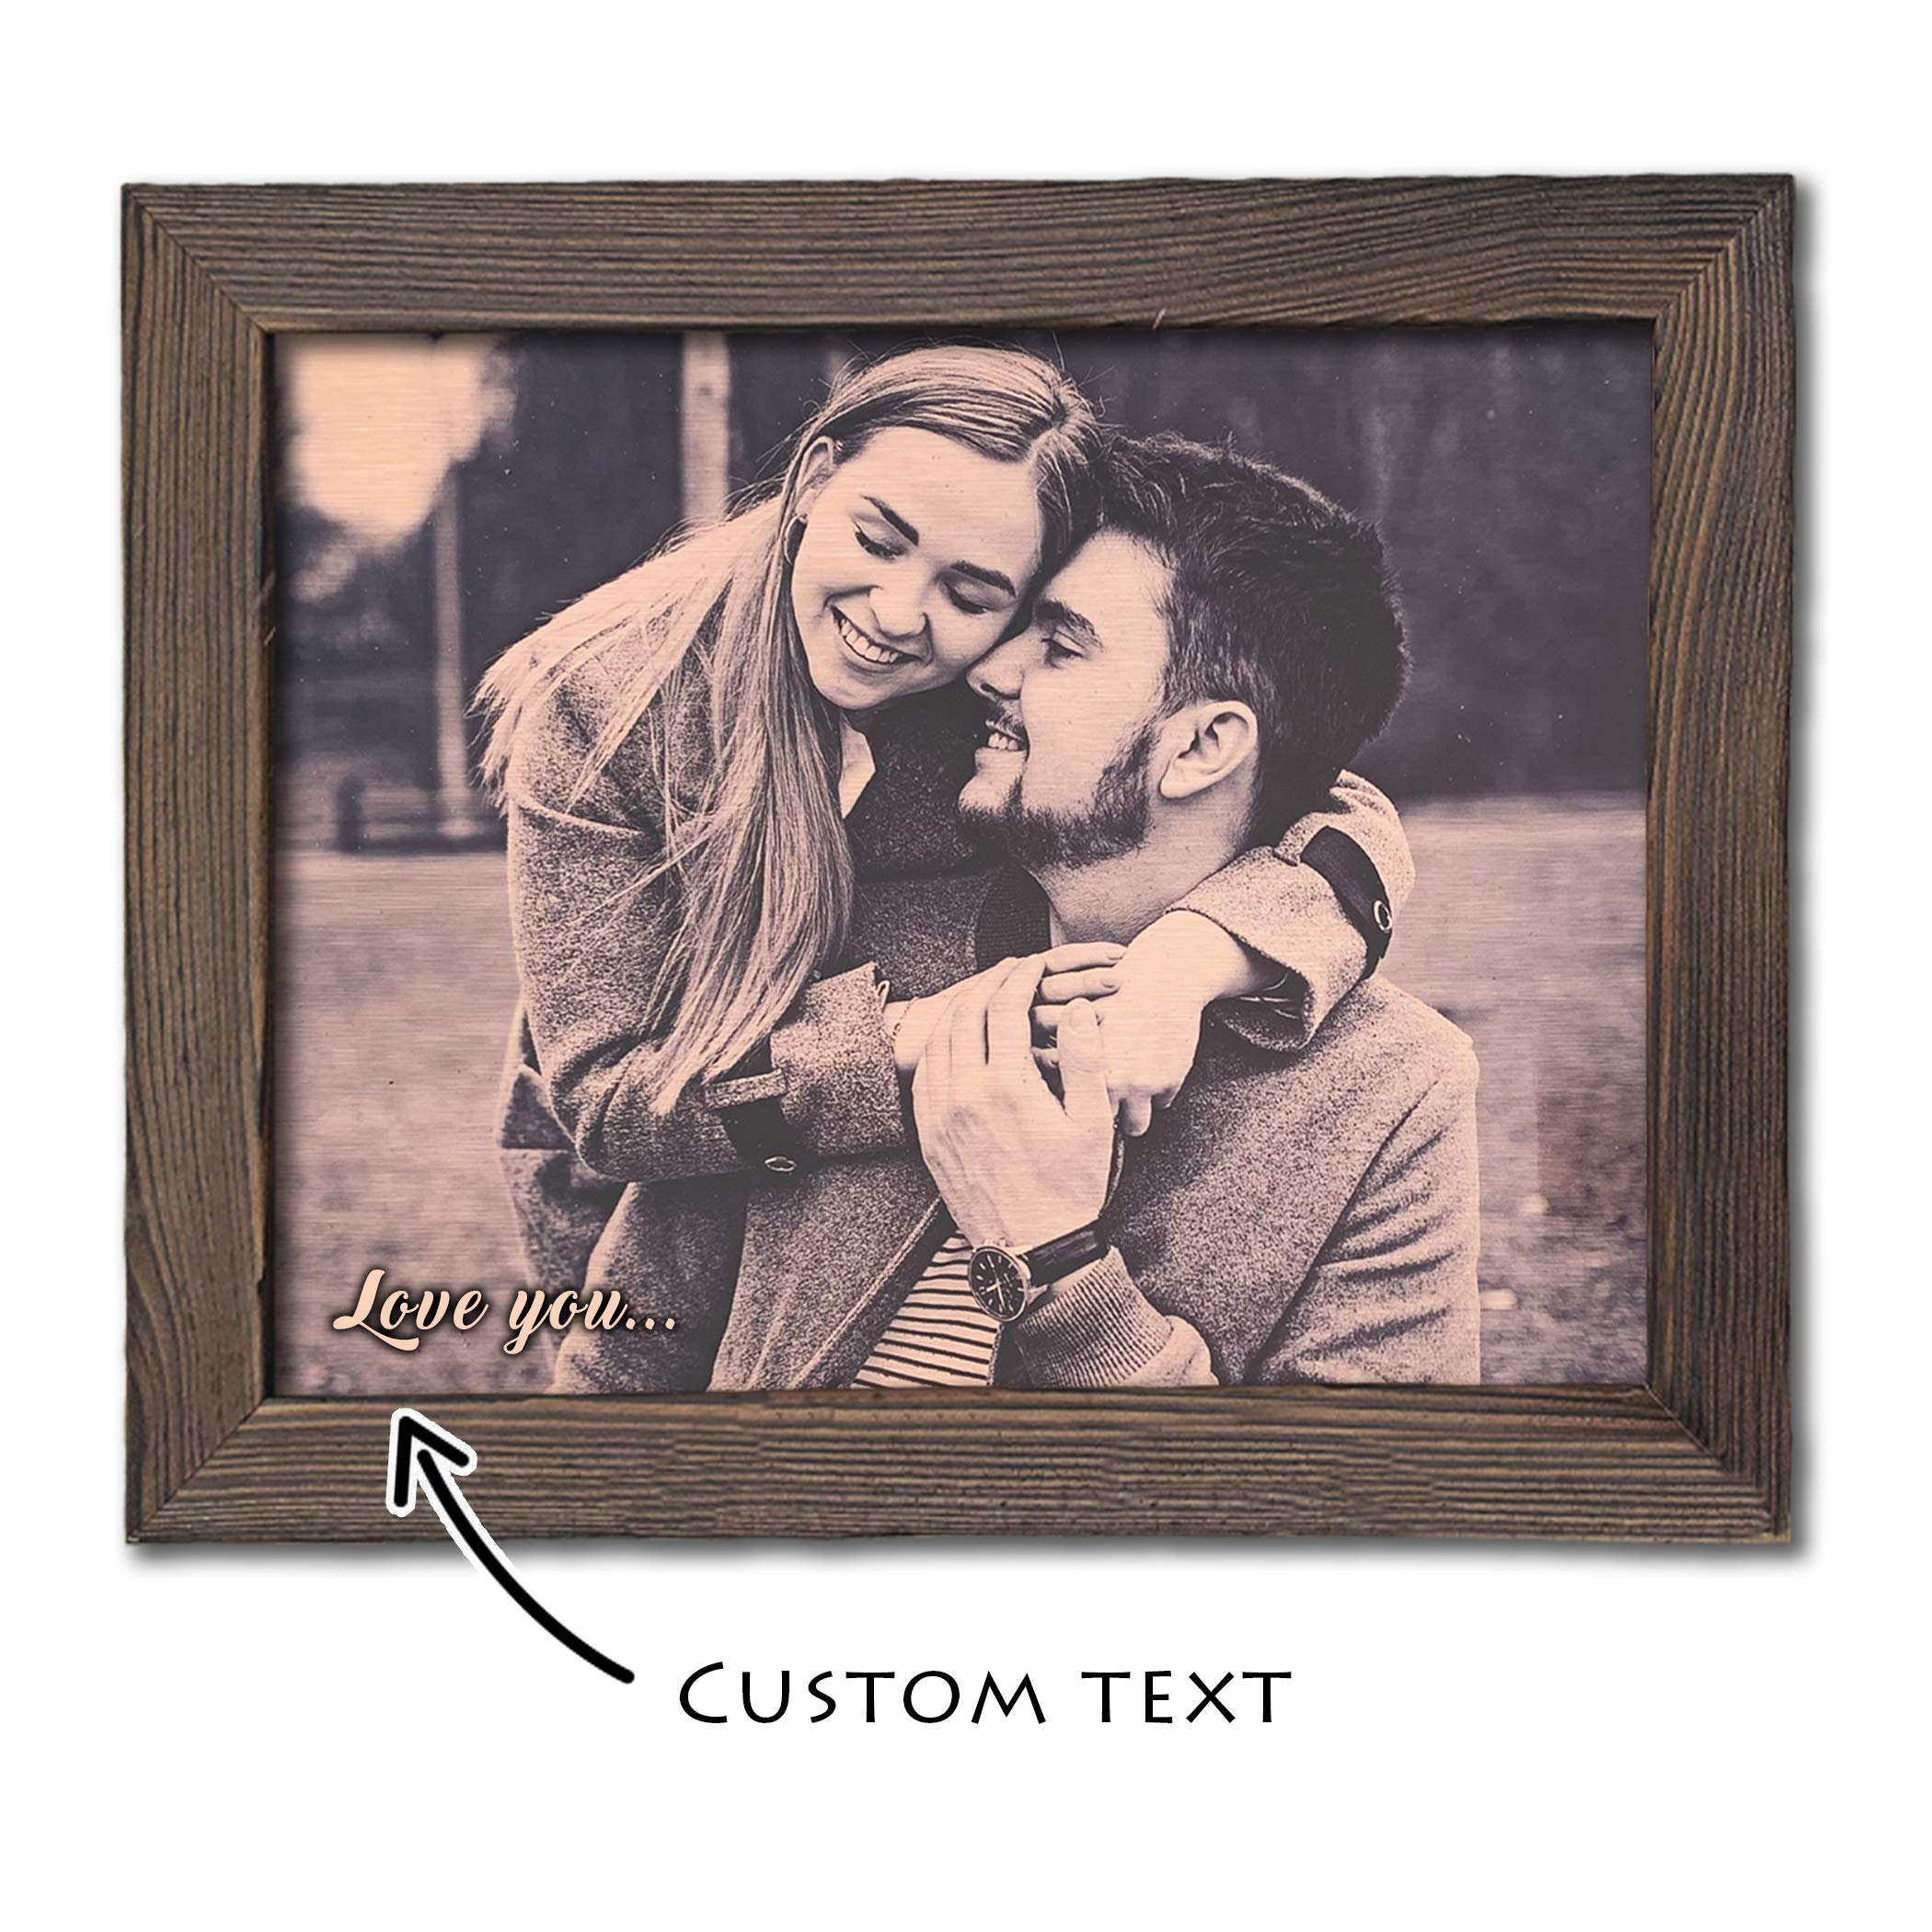 Personalized Photo on Copper Anniversary Gifts For Her or Him 7th Anniversary Gifts For Her 7 Year Anniversary Gift for Her